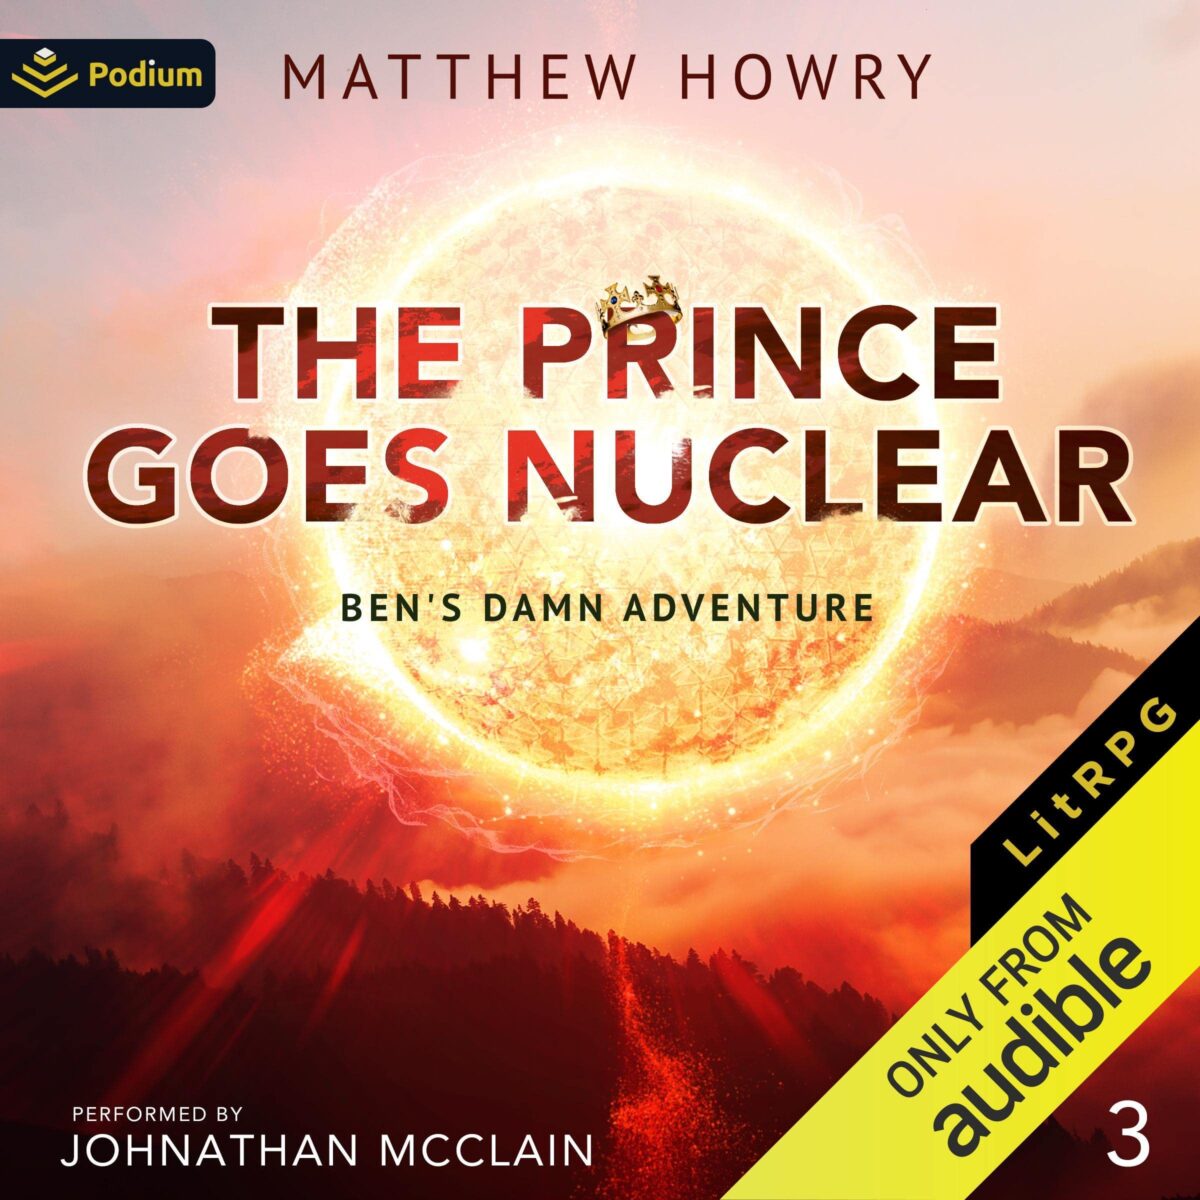 The Prince Goes Nuclear – The Audiobook Review